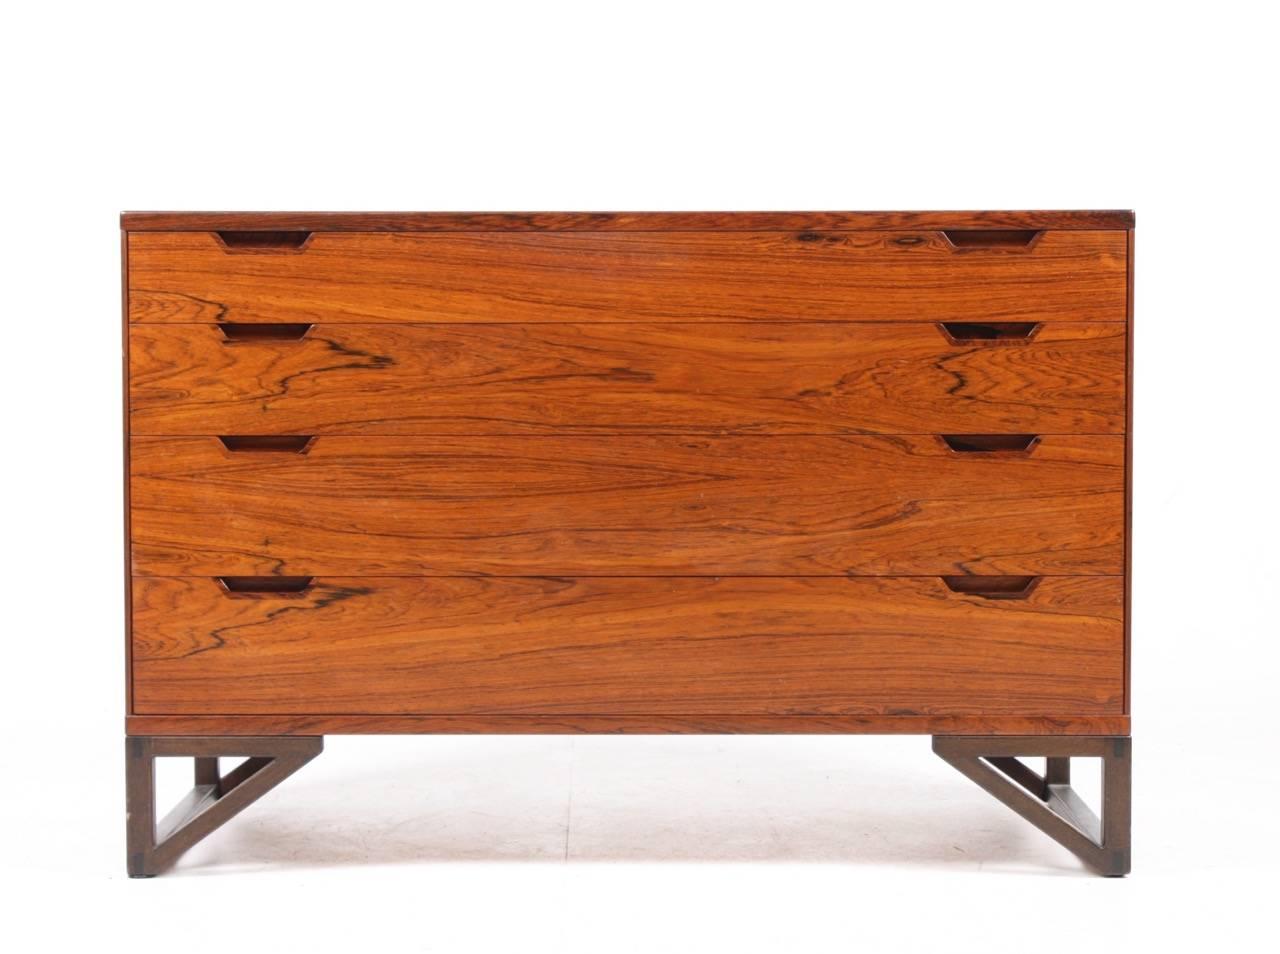 Elegant commode in rosewood designed by Svend Langkilde M.A.A. Made in Denmark, circa 1965. Great original condition.